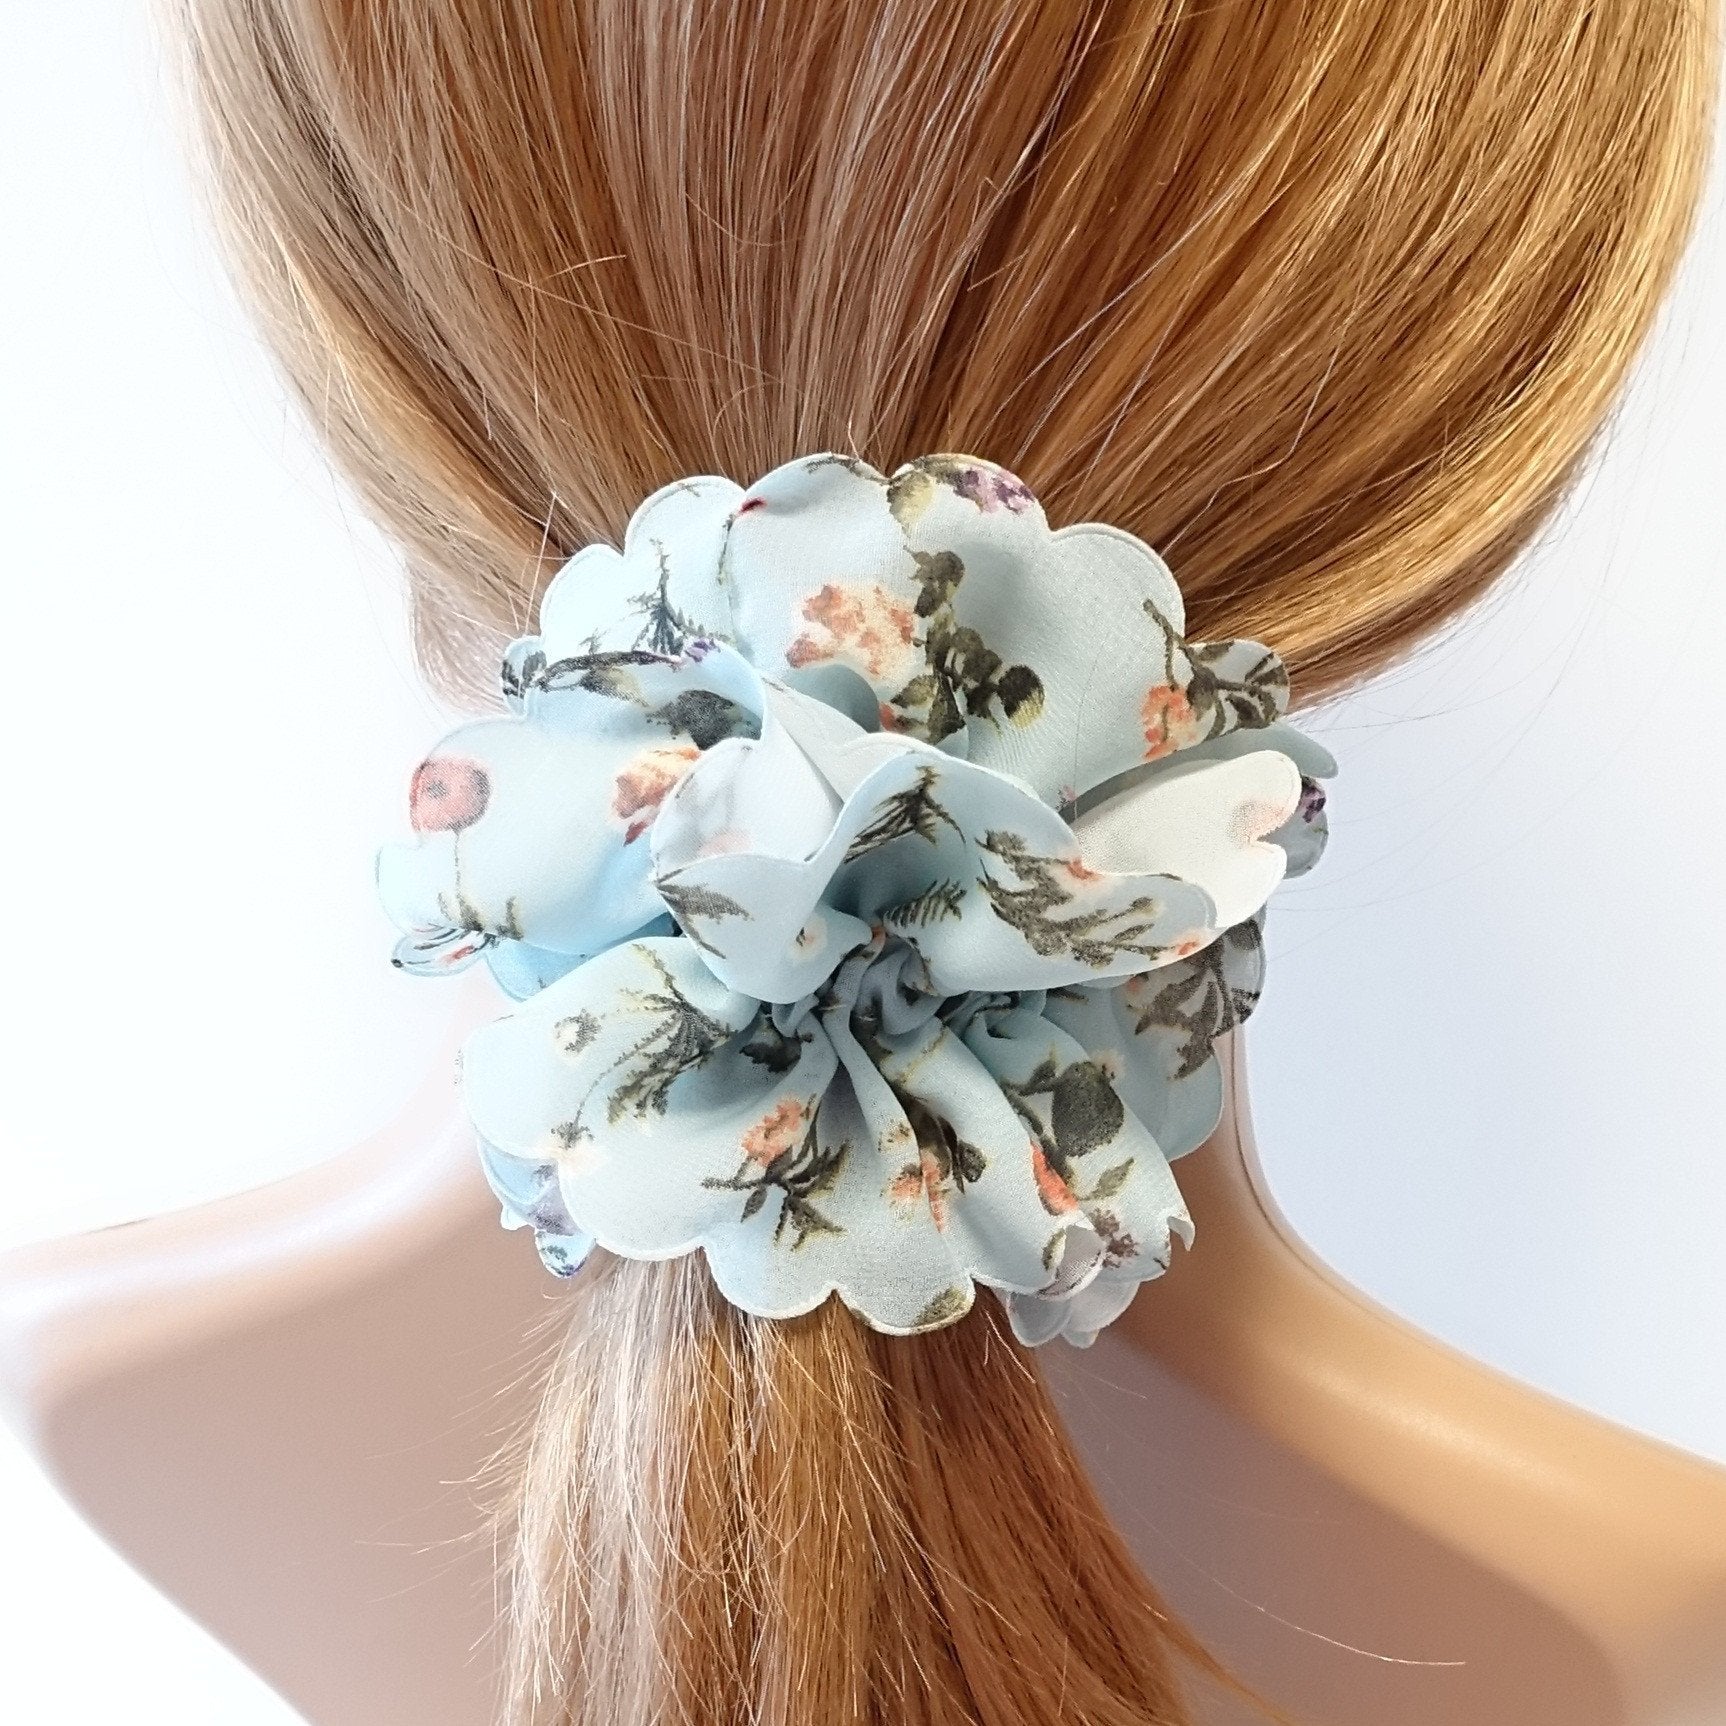 Veryshine hair accessories product lines